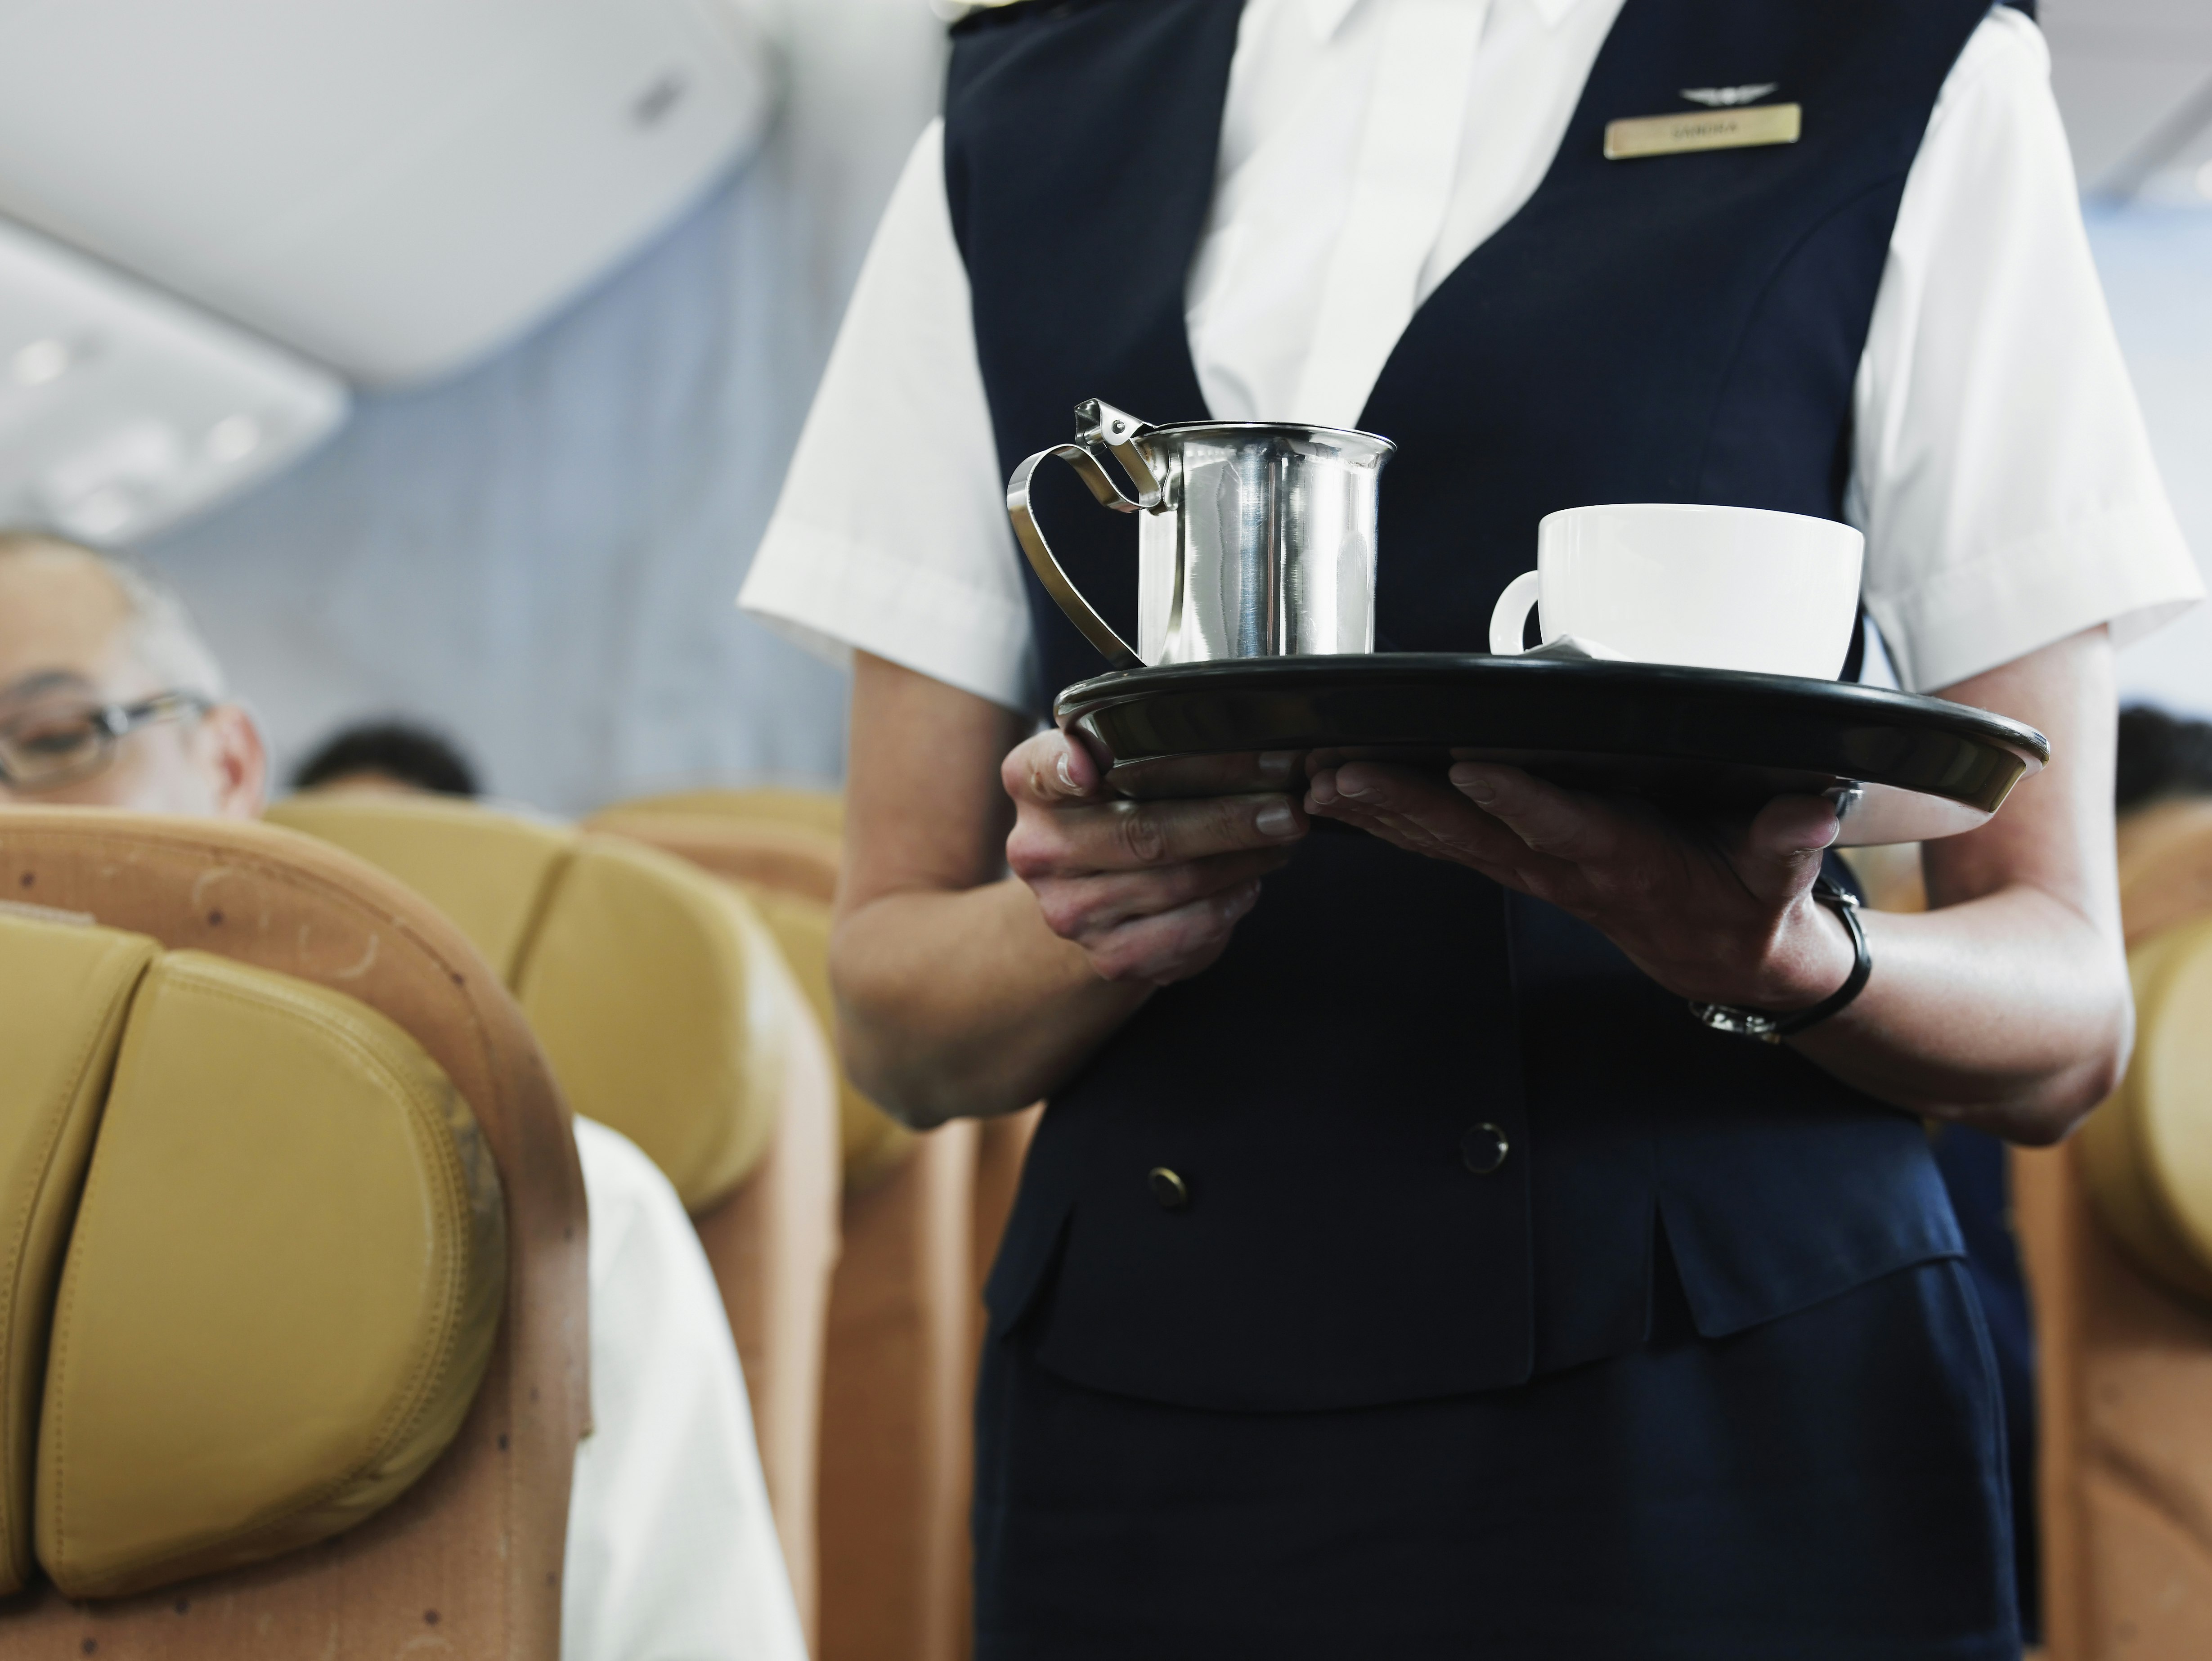 Flight attendant holding tray with coffee